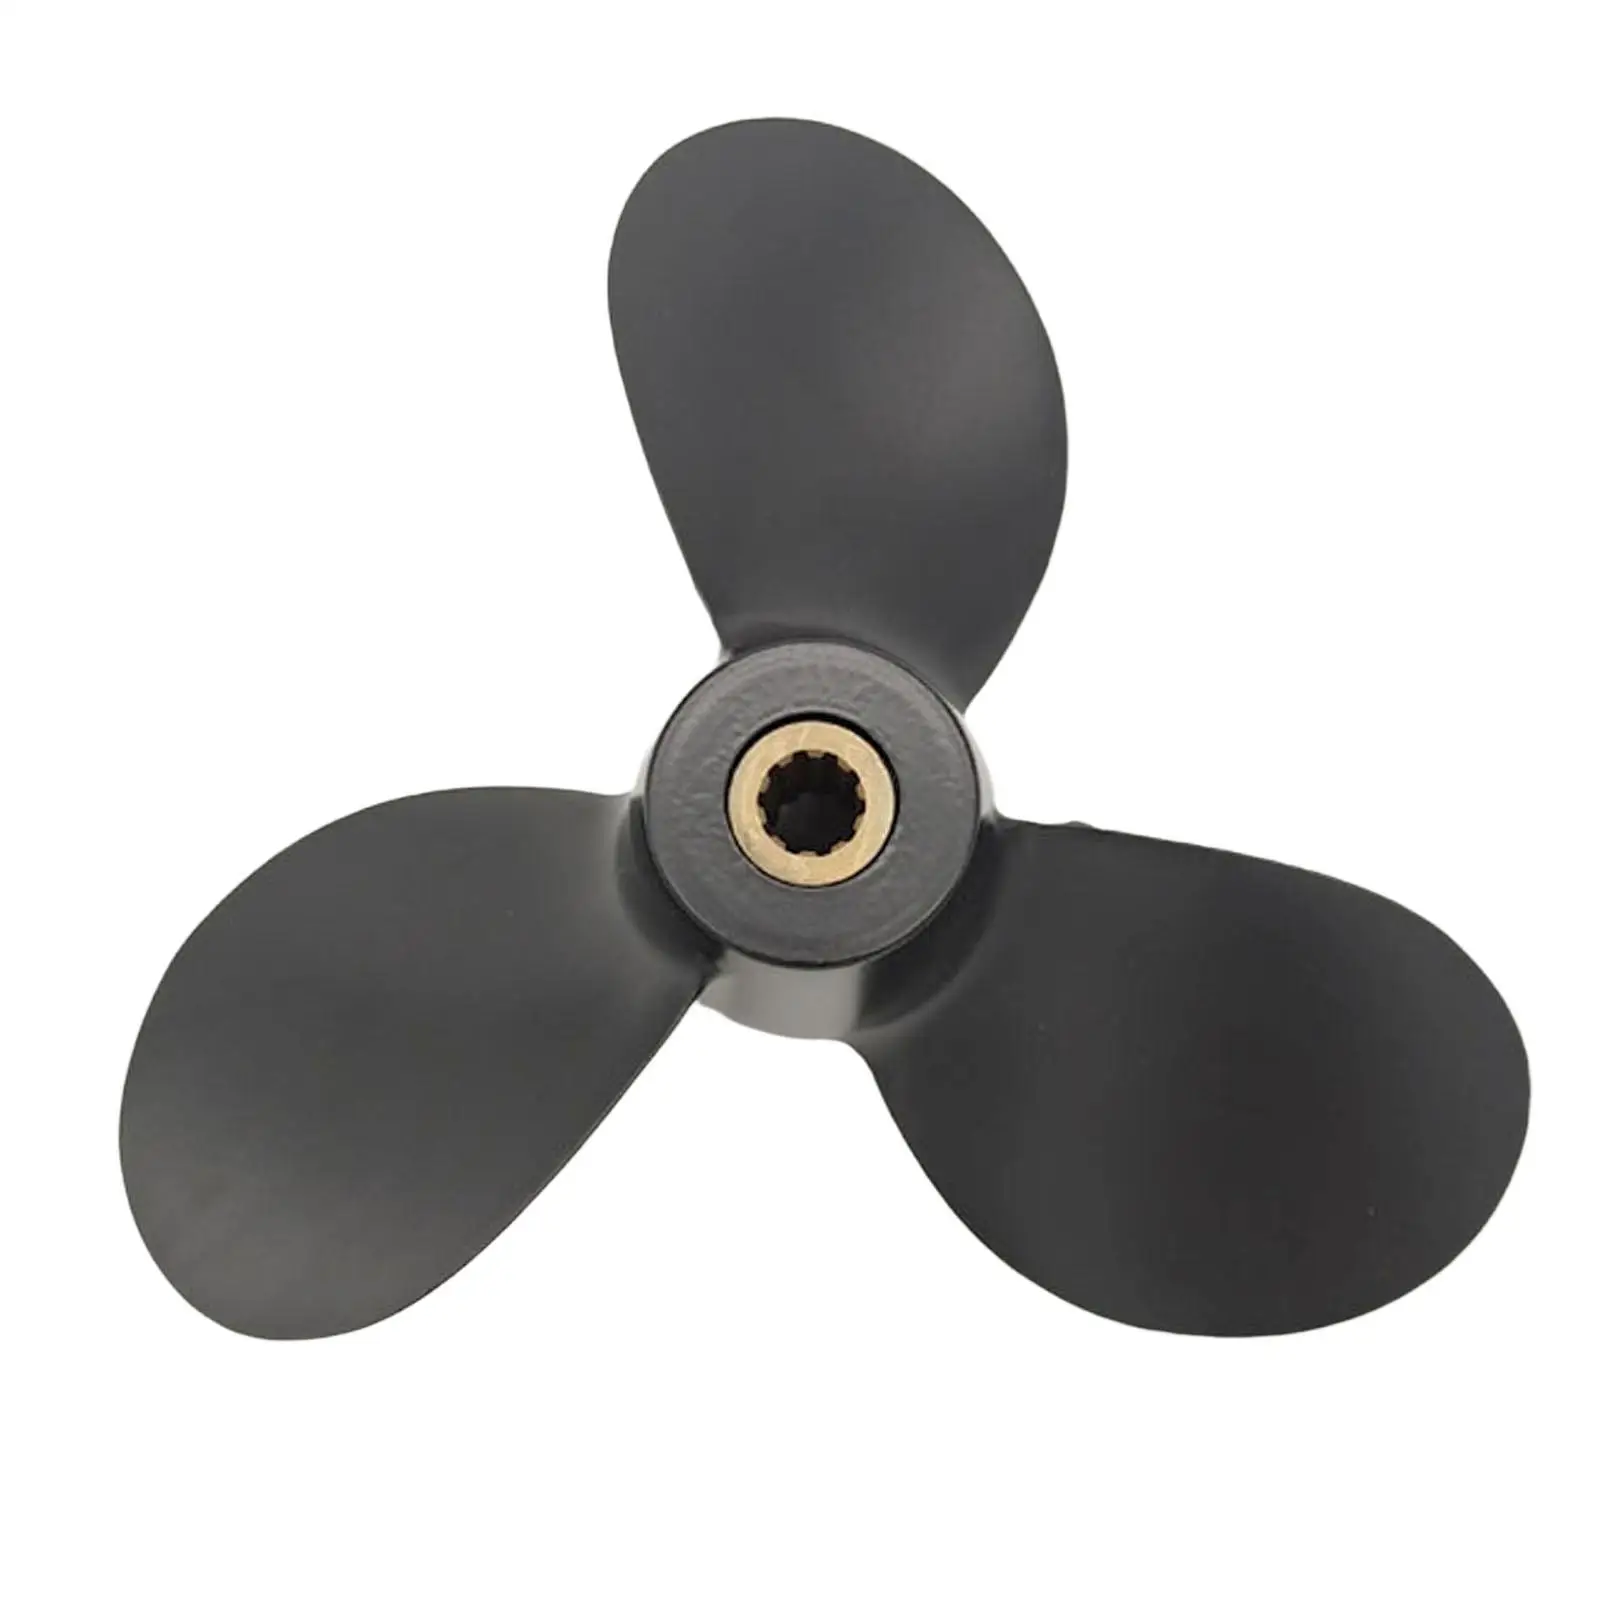 Marine Propeller 7 1/2x7 58111-98651-019 Replaces Accessories Easily Install Ten